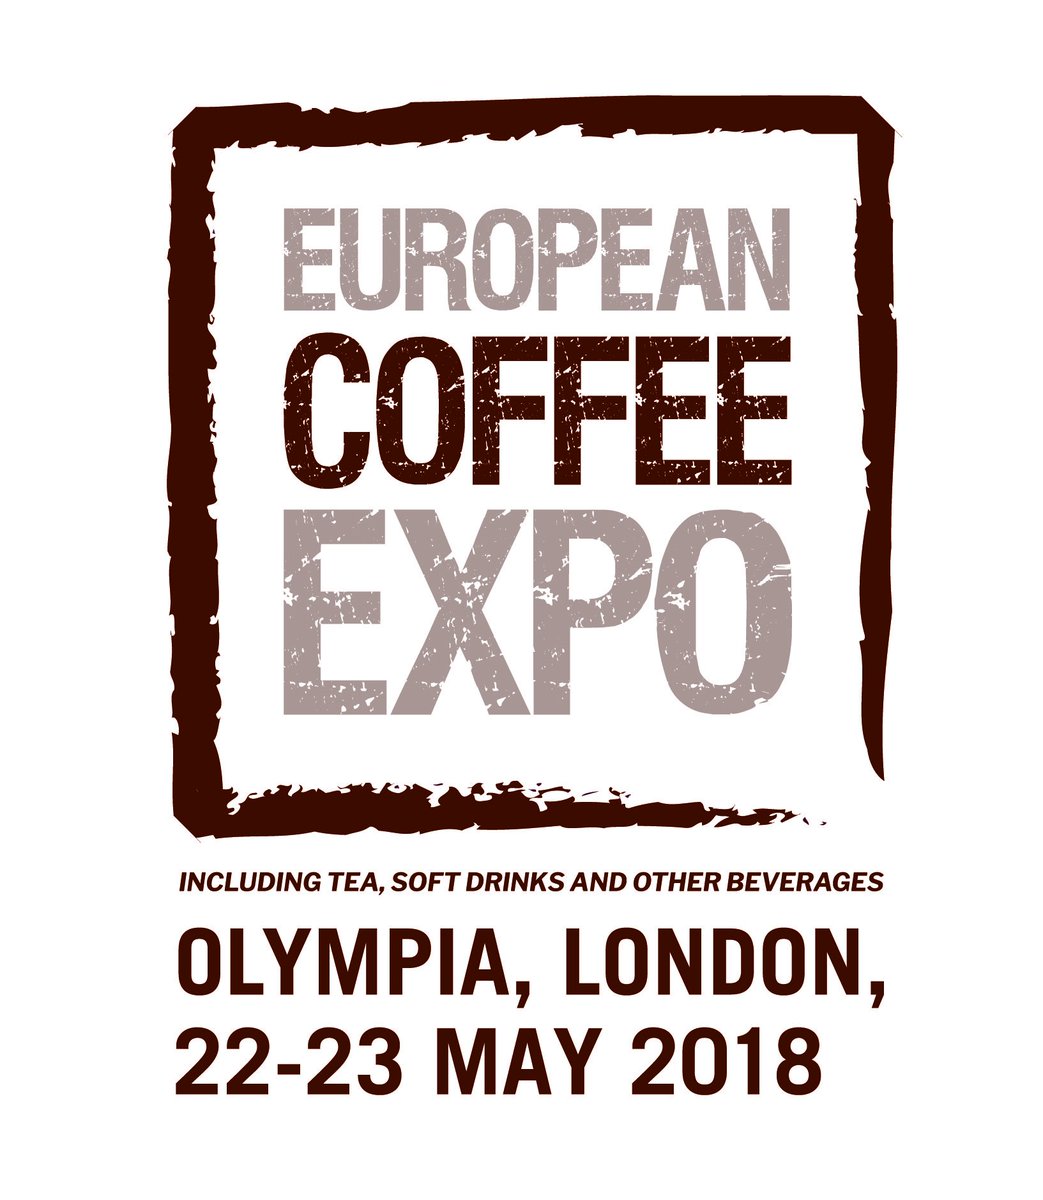 Our excitement is brewing, and so is our tea... all ready for @Eurocoffee_expo! Looking forward to seeing you at Olympia tomorrow and Wednesday!
#NovusTeaUK #AwardWinningTea #EuroCoffeeExpo